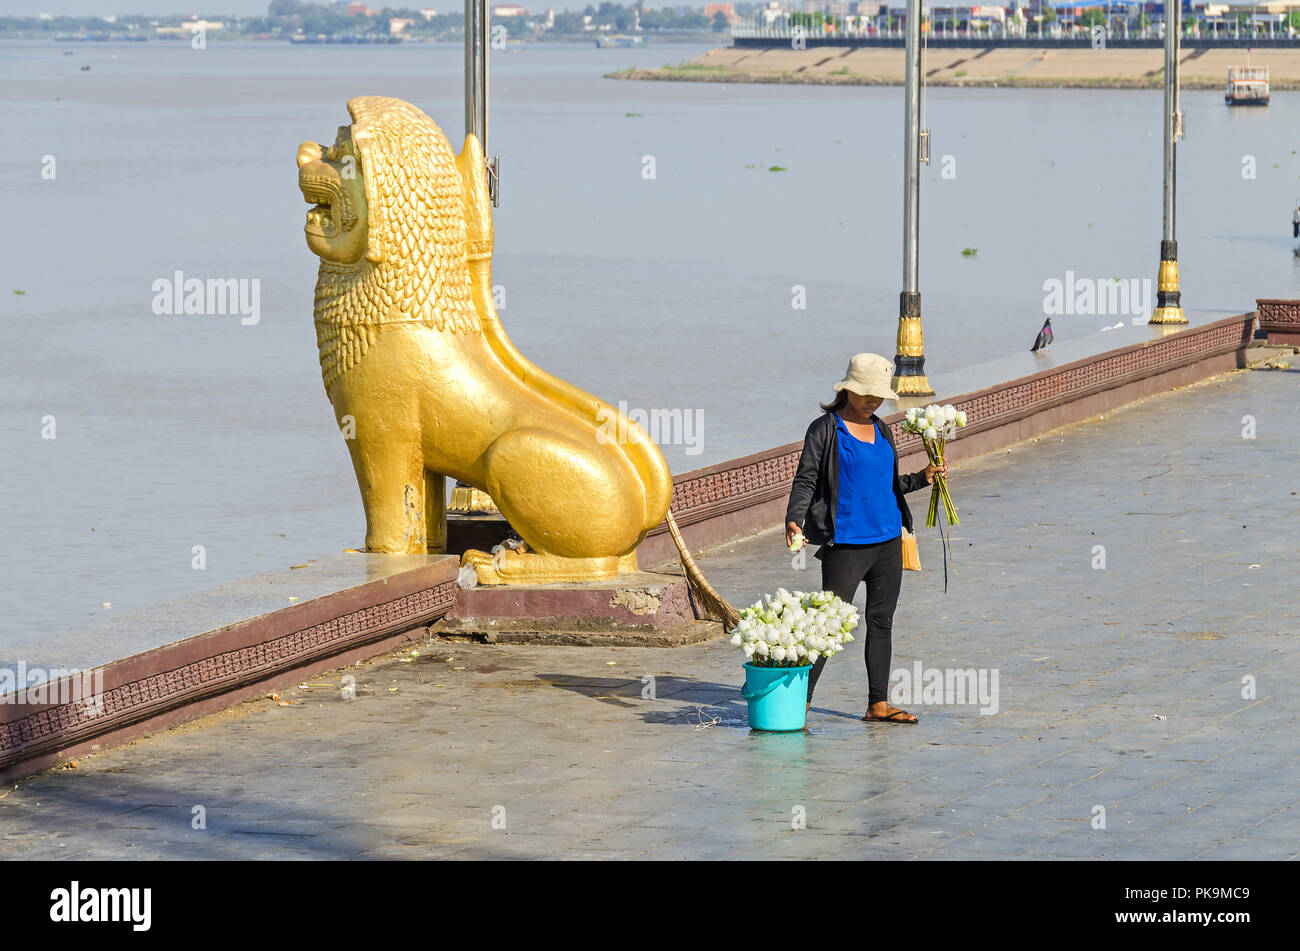 Phnom Penh, Cambodia - April 9, 2018: Preah Sisowath Quay along the banks of the Mekong and Tonle Sap with a lion statue and a woman selling lotus Stock Photo